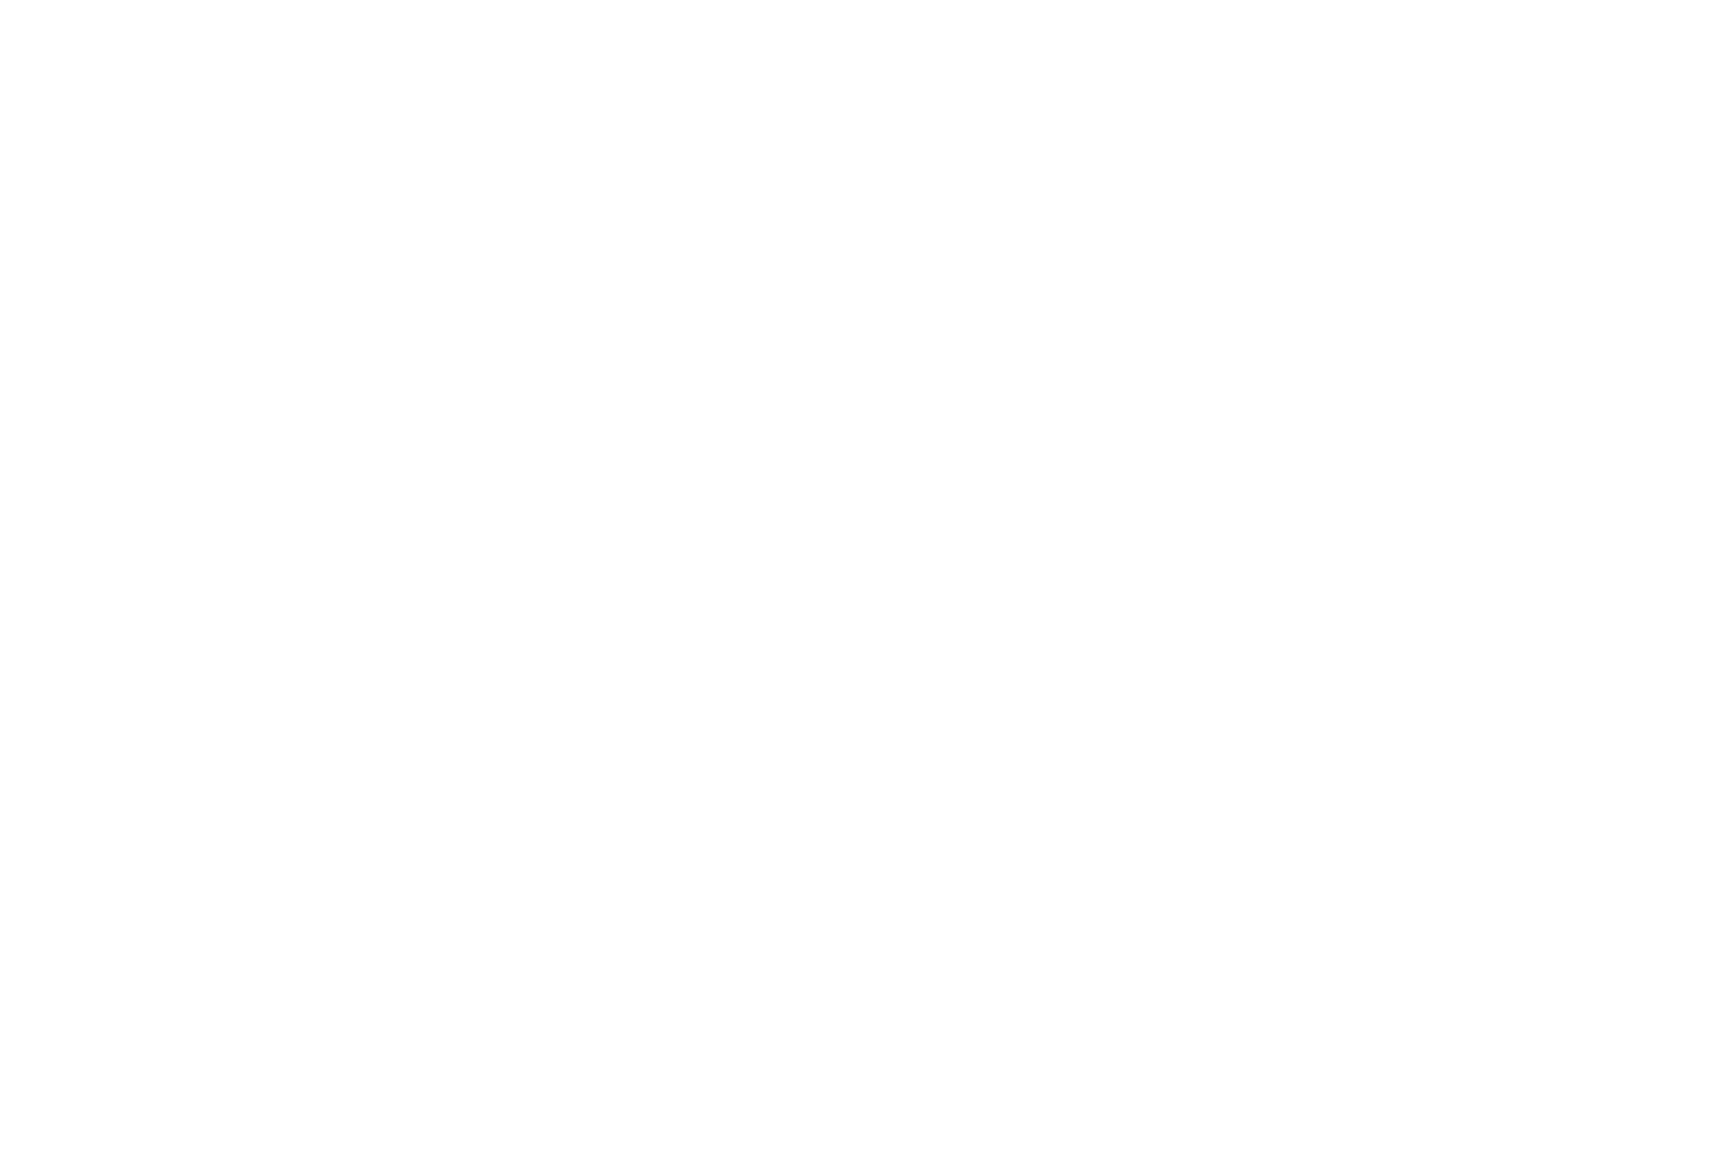 BEST PRODUCTION 2021 - MUNICH MUSIC VIDEO AWARDS - ONEFIFTY - XTC